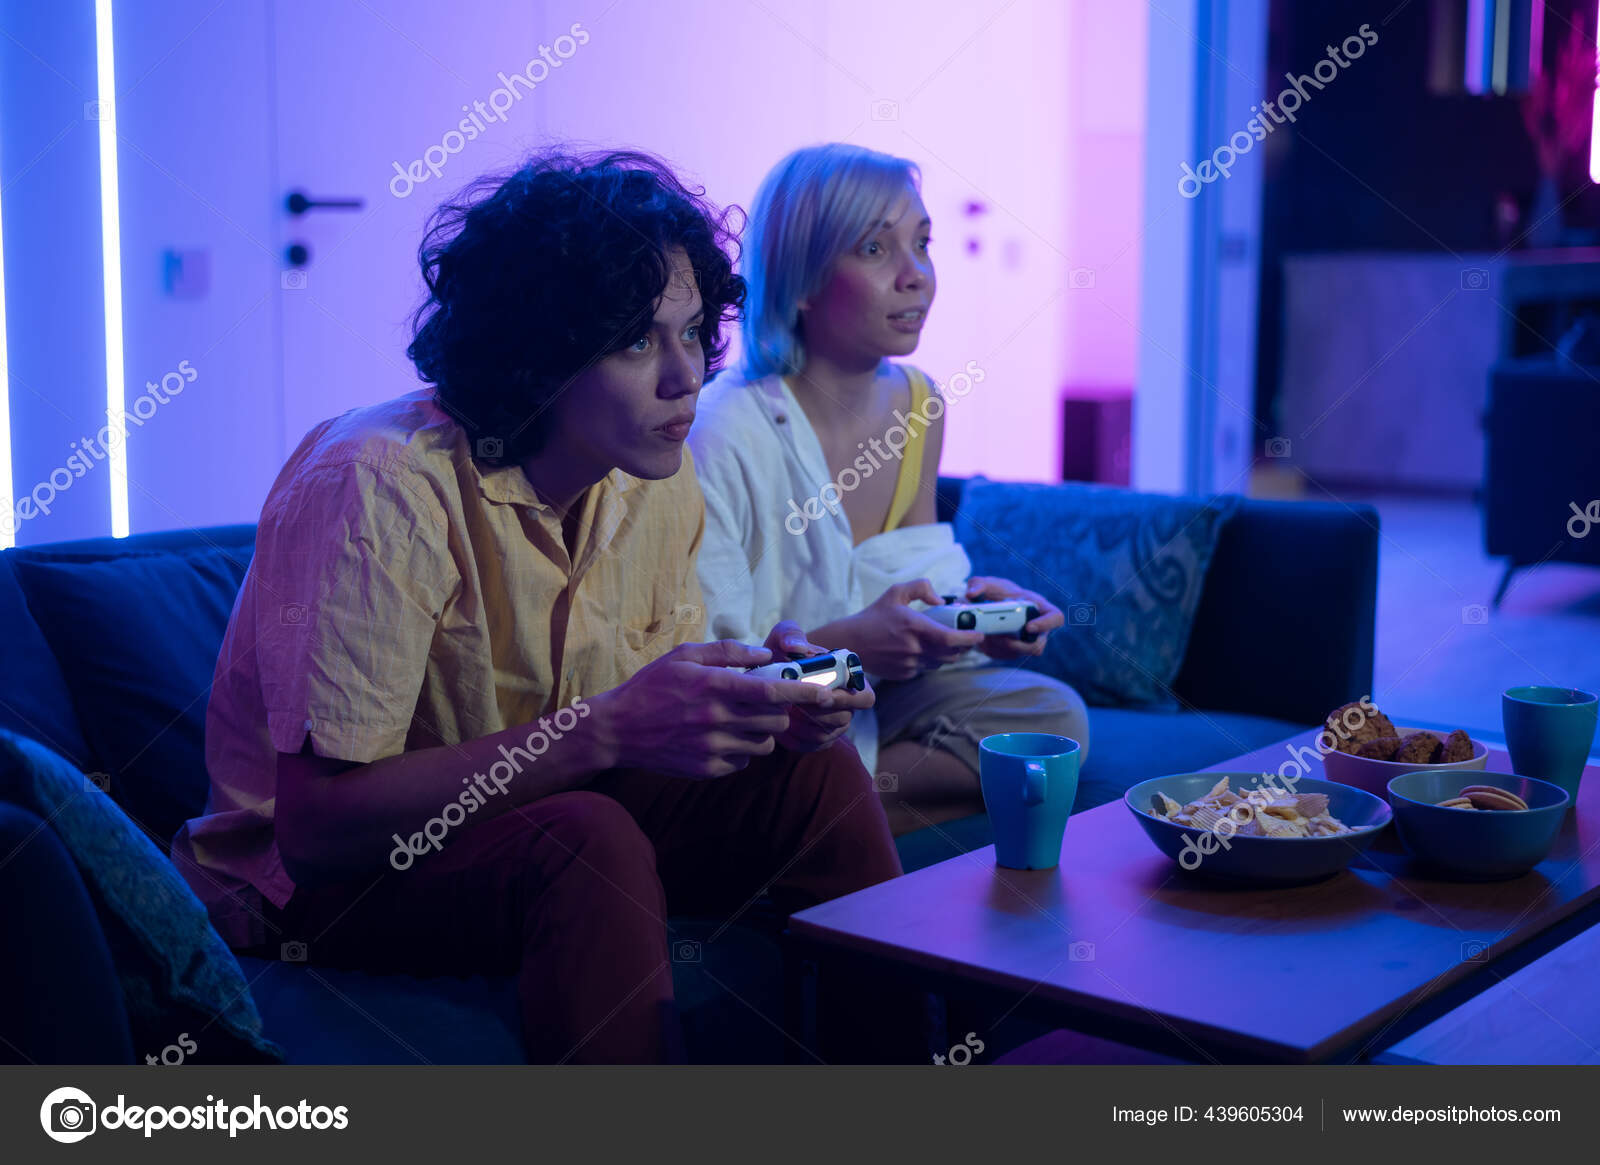 Adults and Video Games